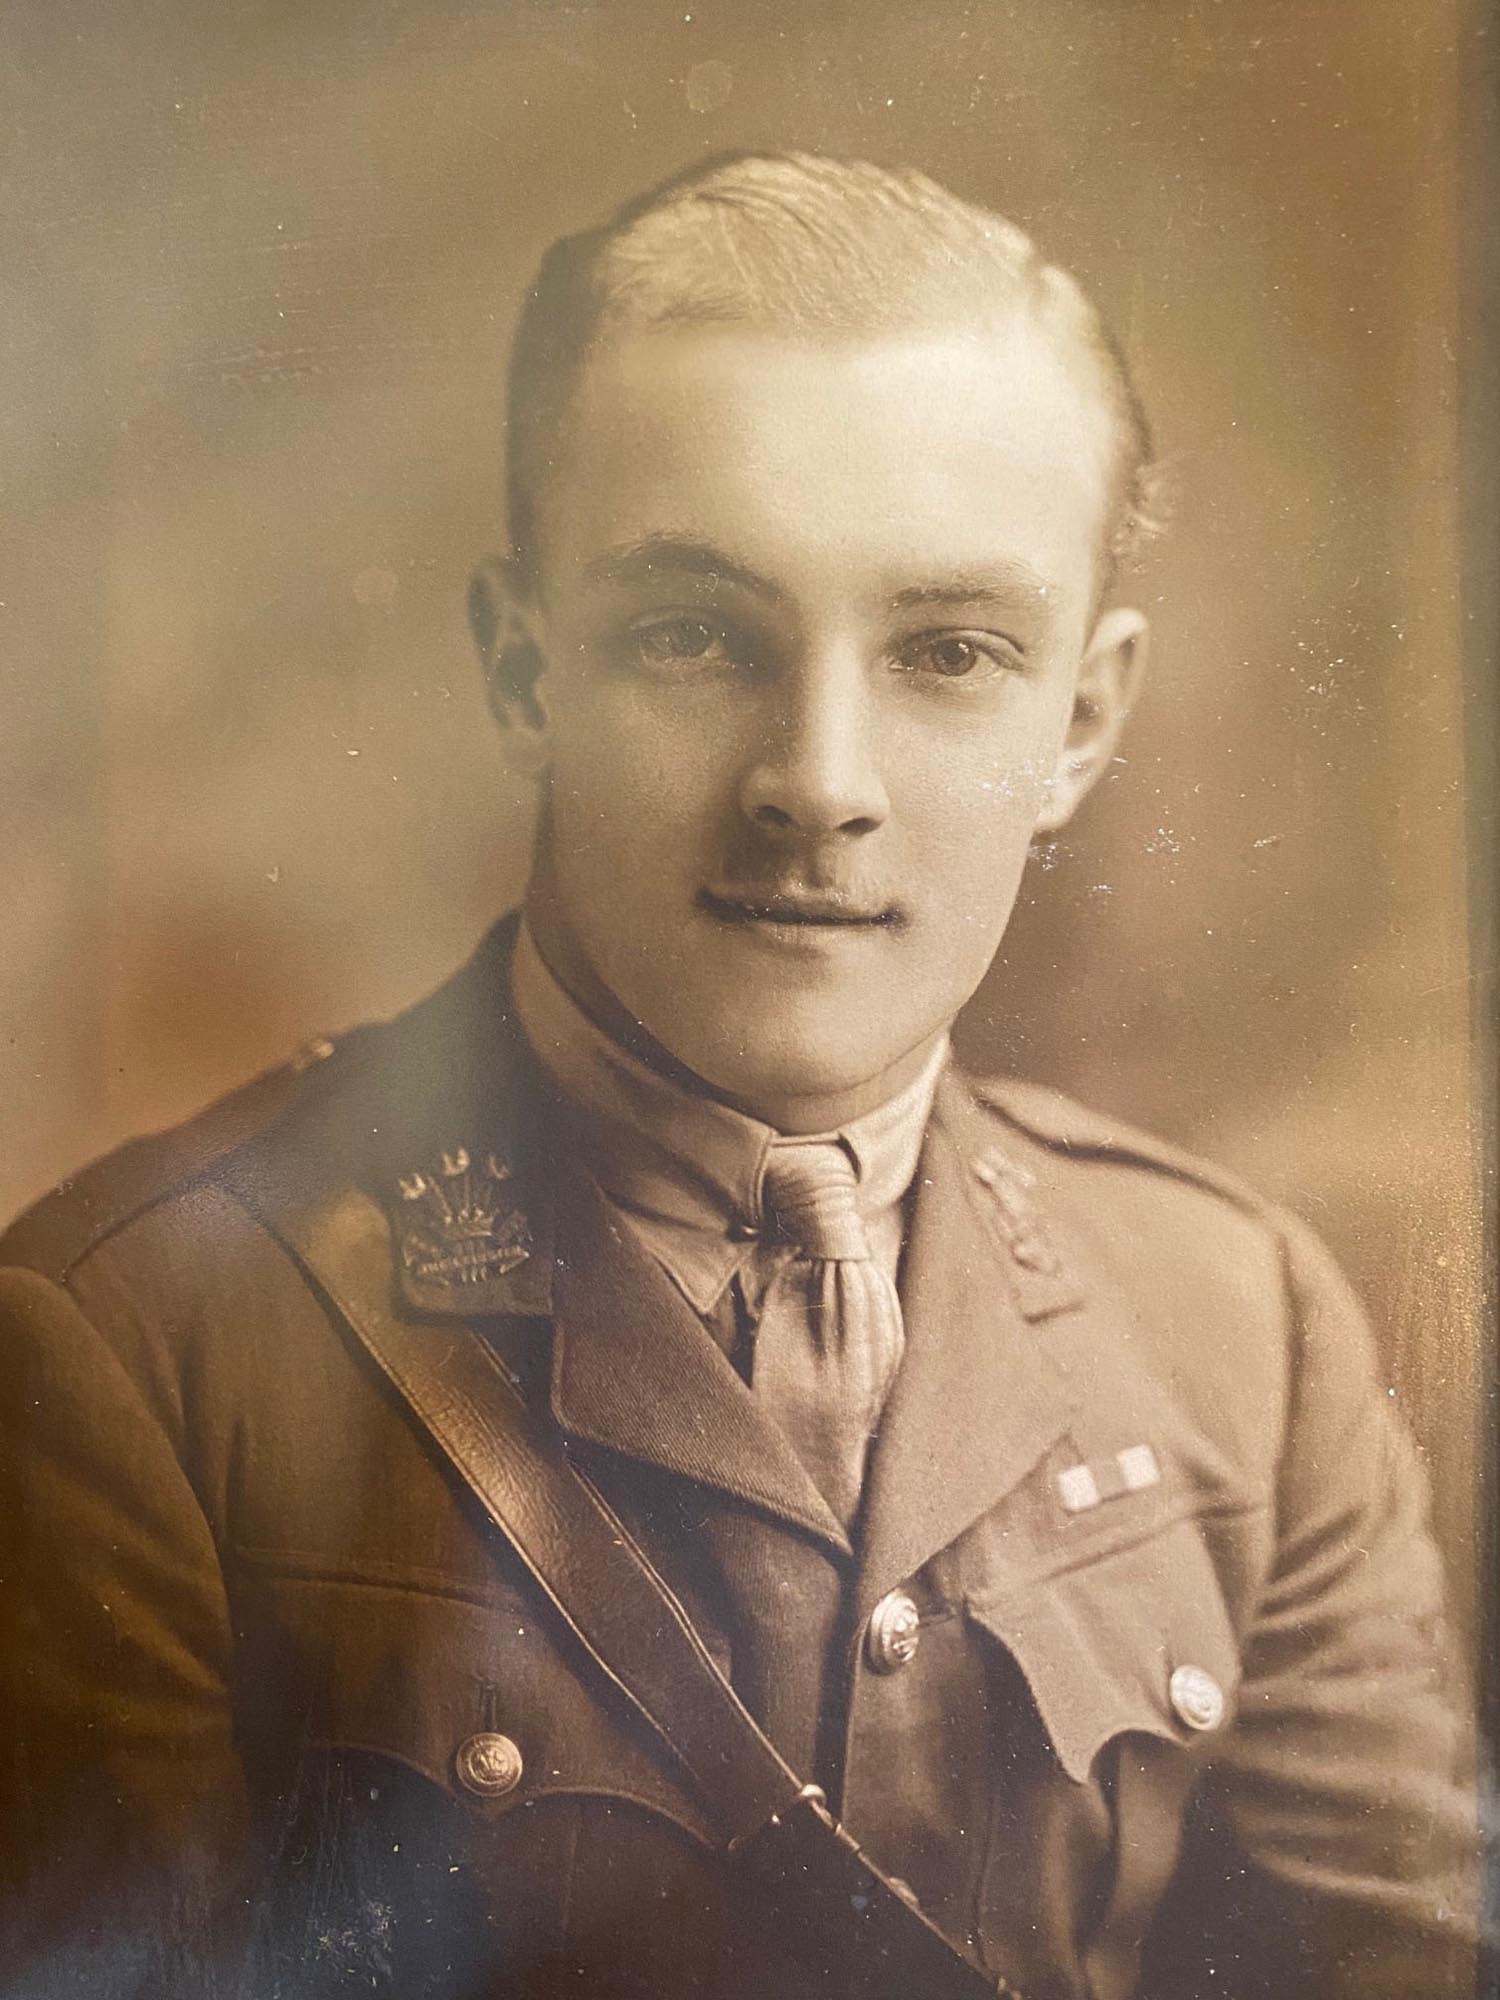 Portrait of Dame Judi Danch's father, Reginald either when he signed up in 1915, or after the war in 1919